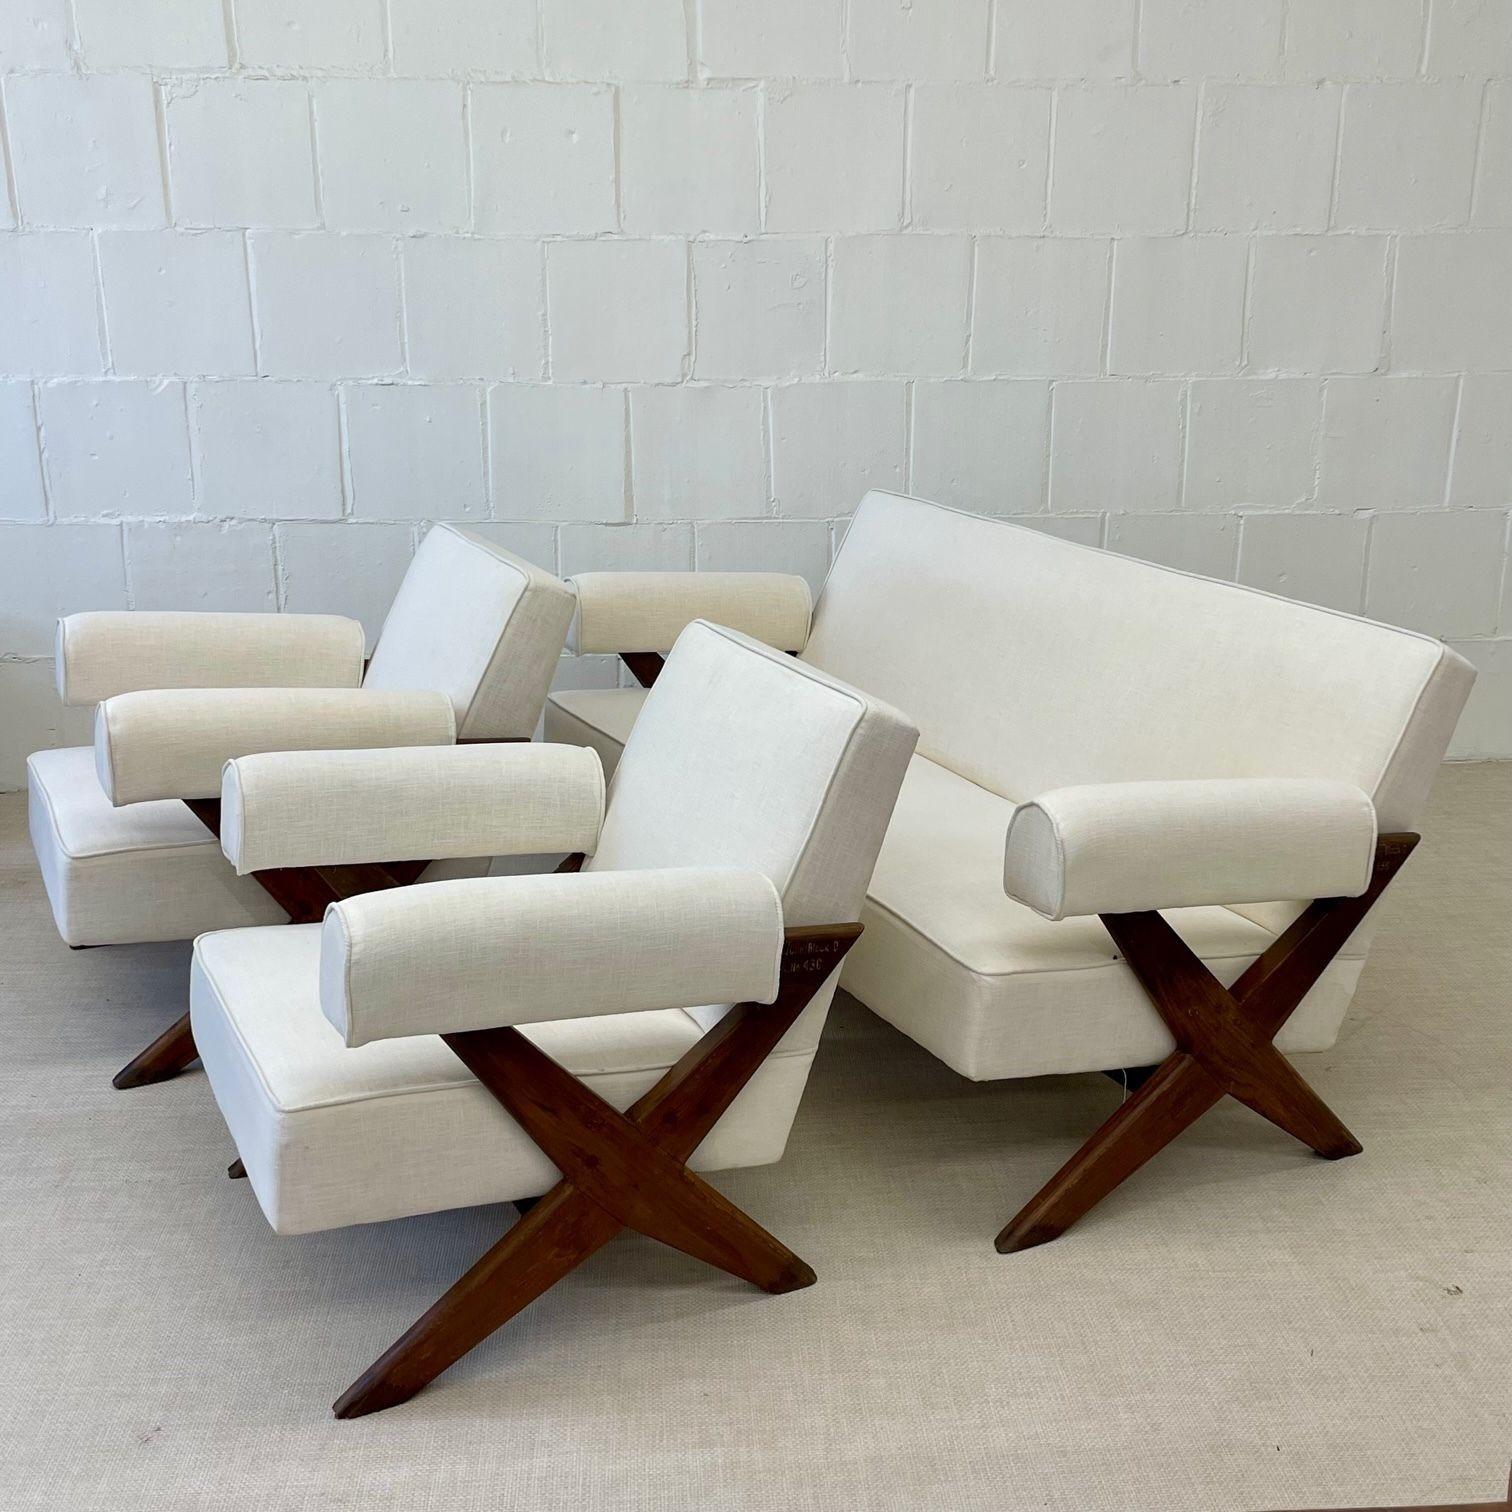 Pierre Jeanneret, French Mid-Century Modern, Lounge Chairs, Chandigarh, 1960s For Sale 5